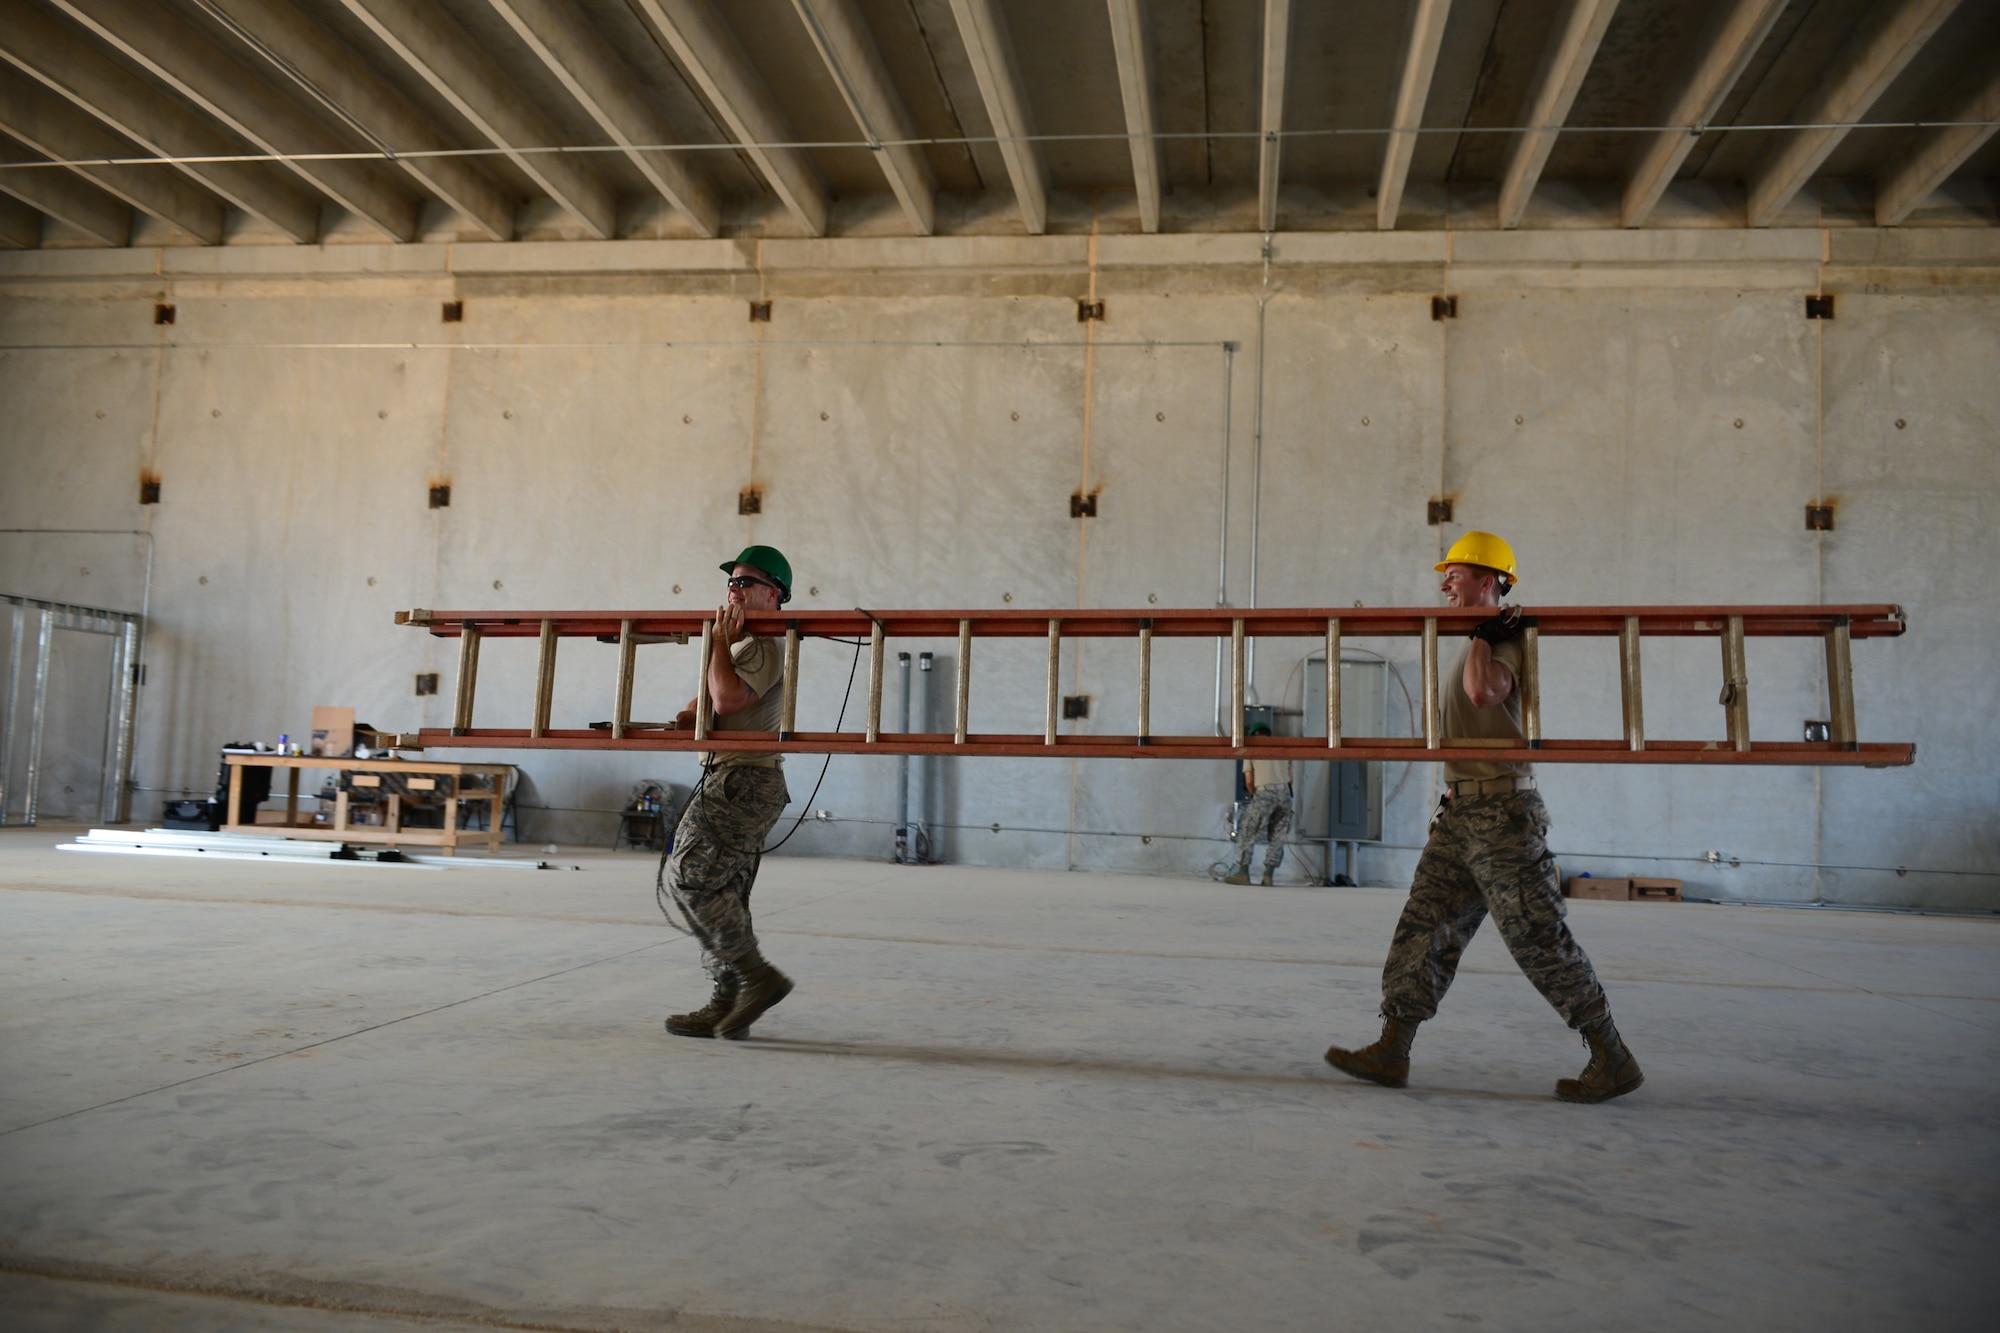 From the left, U.S. Air Force Tech. Sgt. Donald Linscott and Staff Sgt. Ben Keeler, both assigned to the 157th Civil Engineering Squadron, New Hampshire Air National Guard, carry a ladder during construction on the Commando Warrior Training Facility, Andersen Air Force Base, Guam, June 20, 2016. 157 CES Airmen are deployed to Guam for annual training where they are working on a construction project for the Pacific Command Regional Training Center. (Air National Guard photo by Airman 1st Class Ashlyn J. Correia)